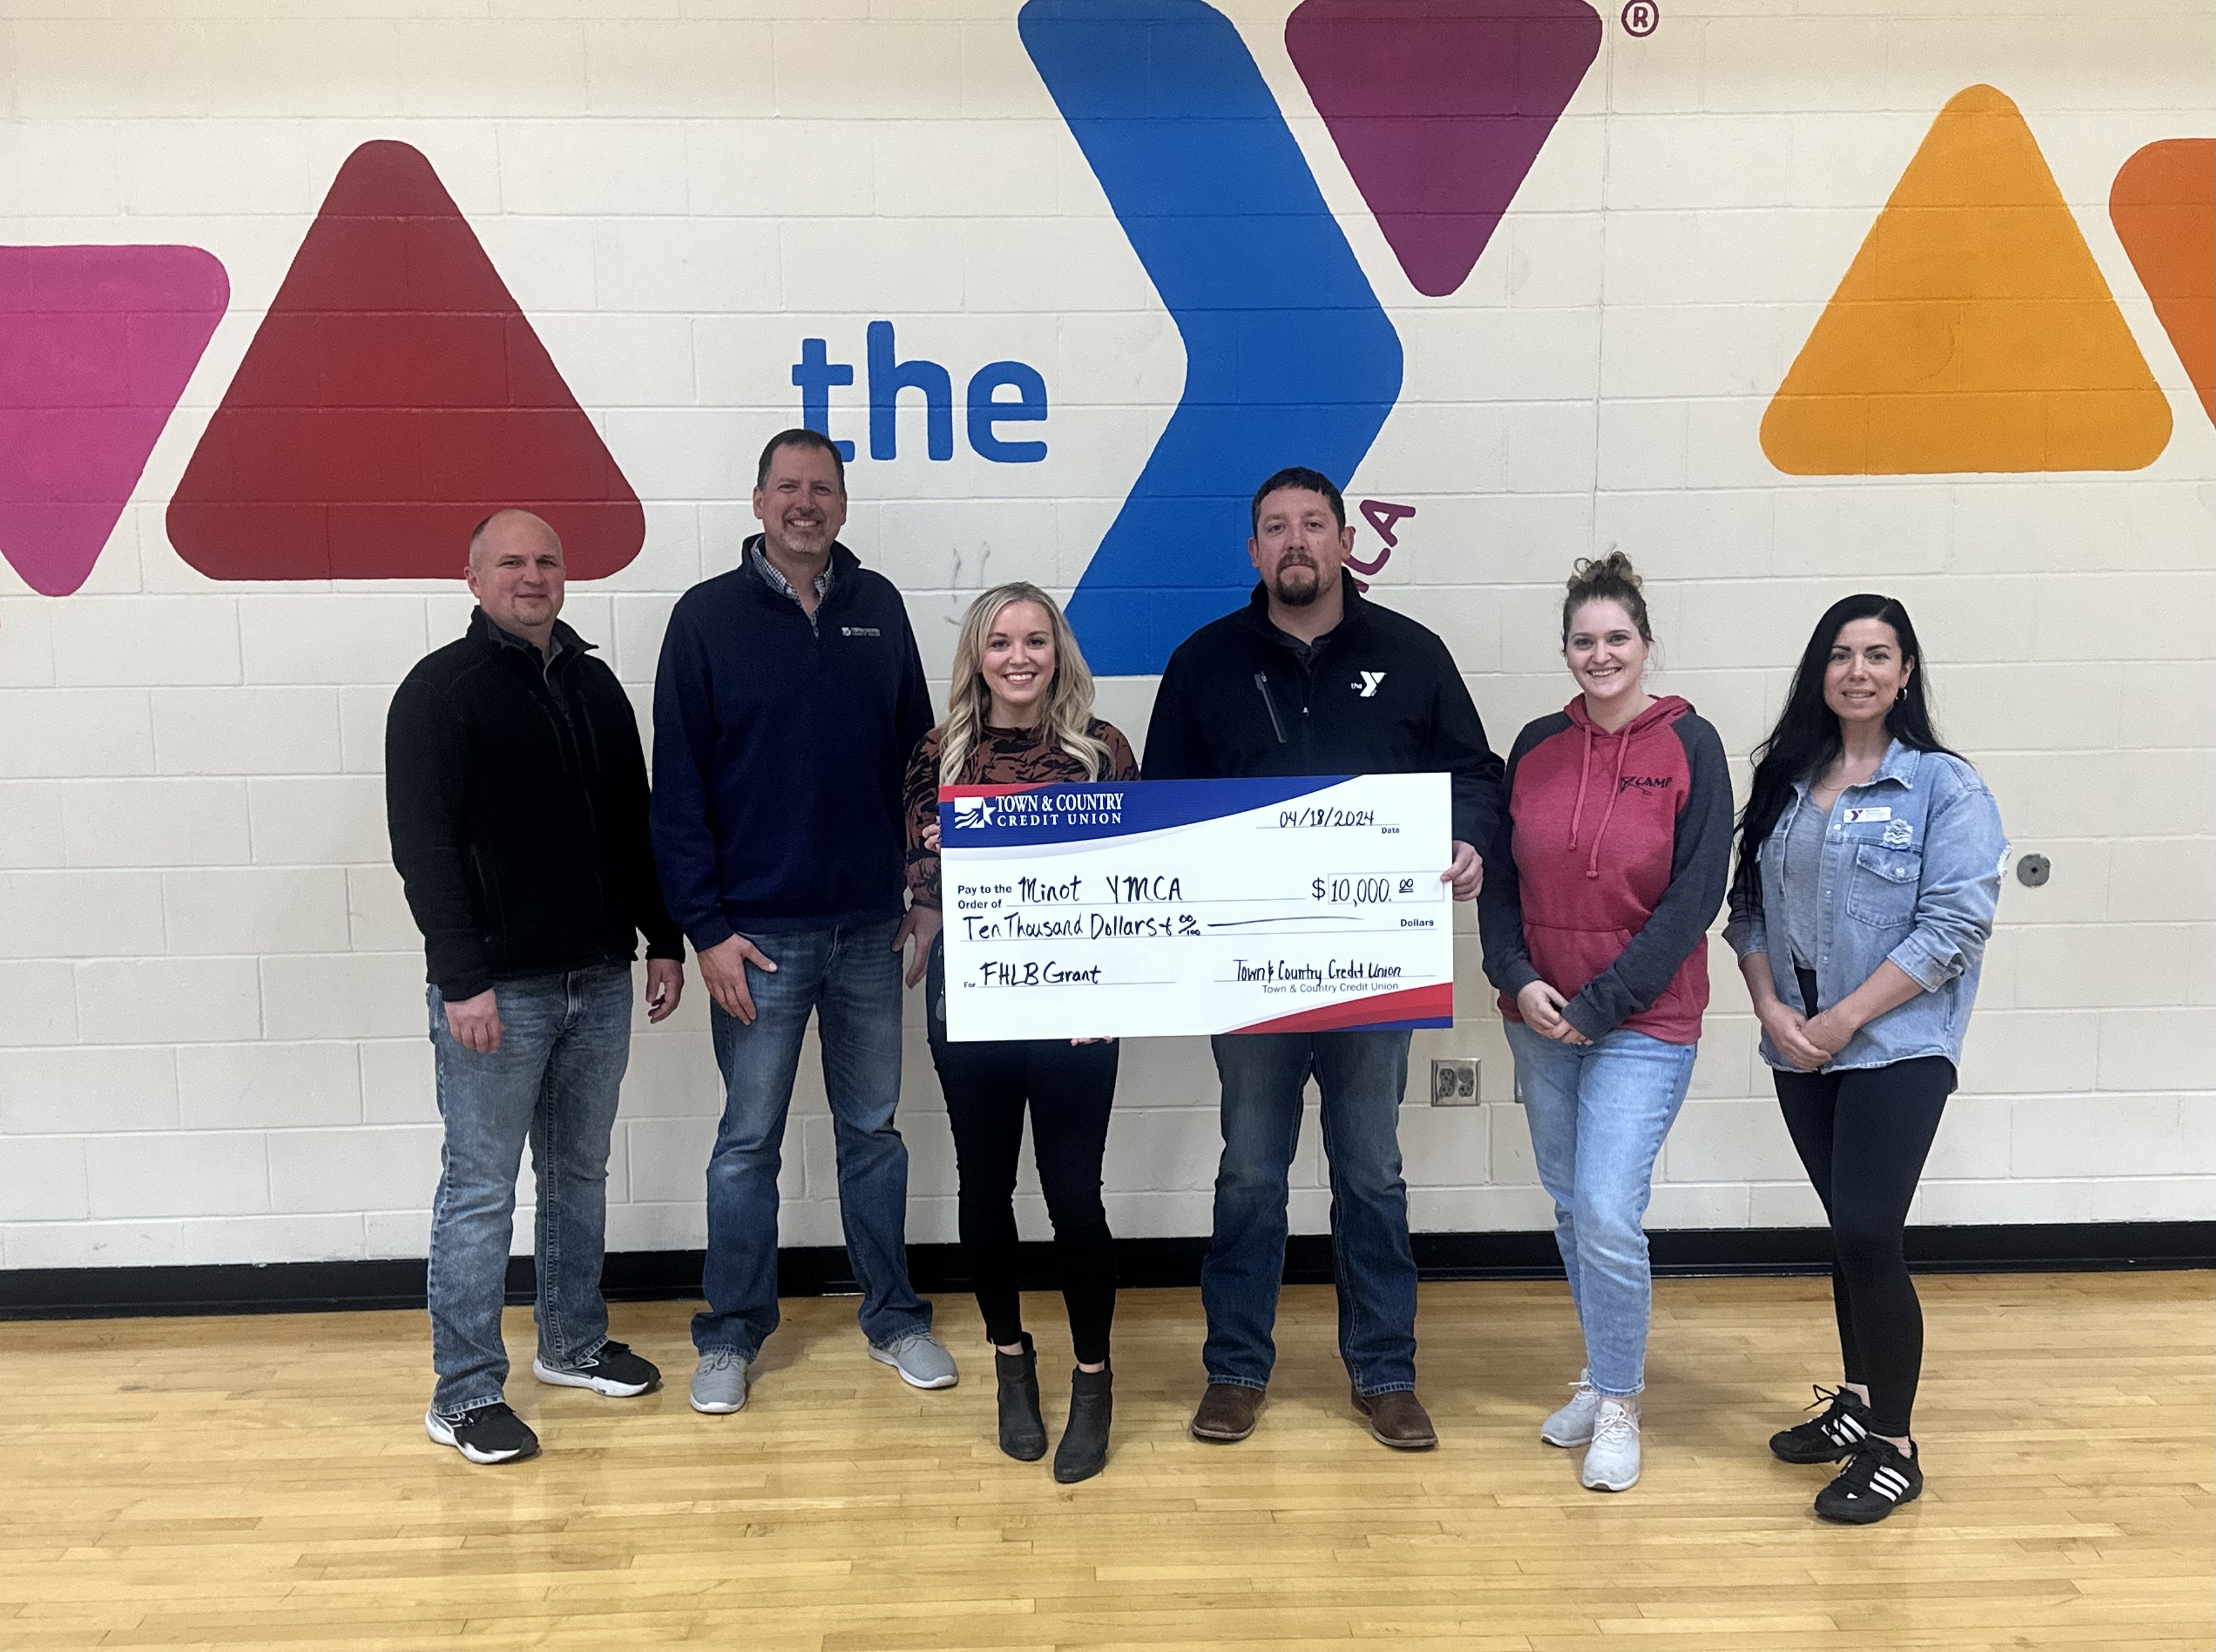 Photo of Town & Country and The Minot YMCA Representatives holding a large check for $10,000 presented to the YMCA for a FHLB Grant